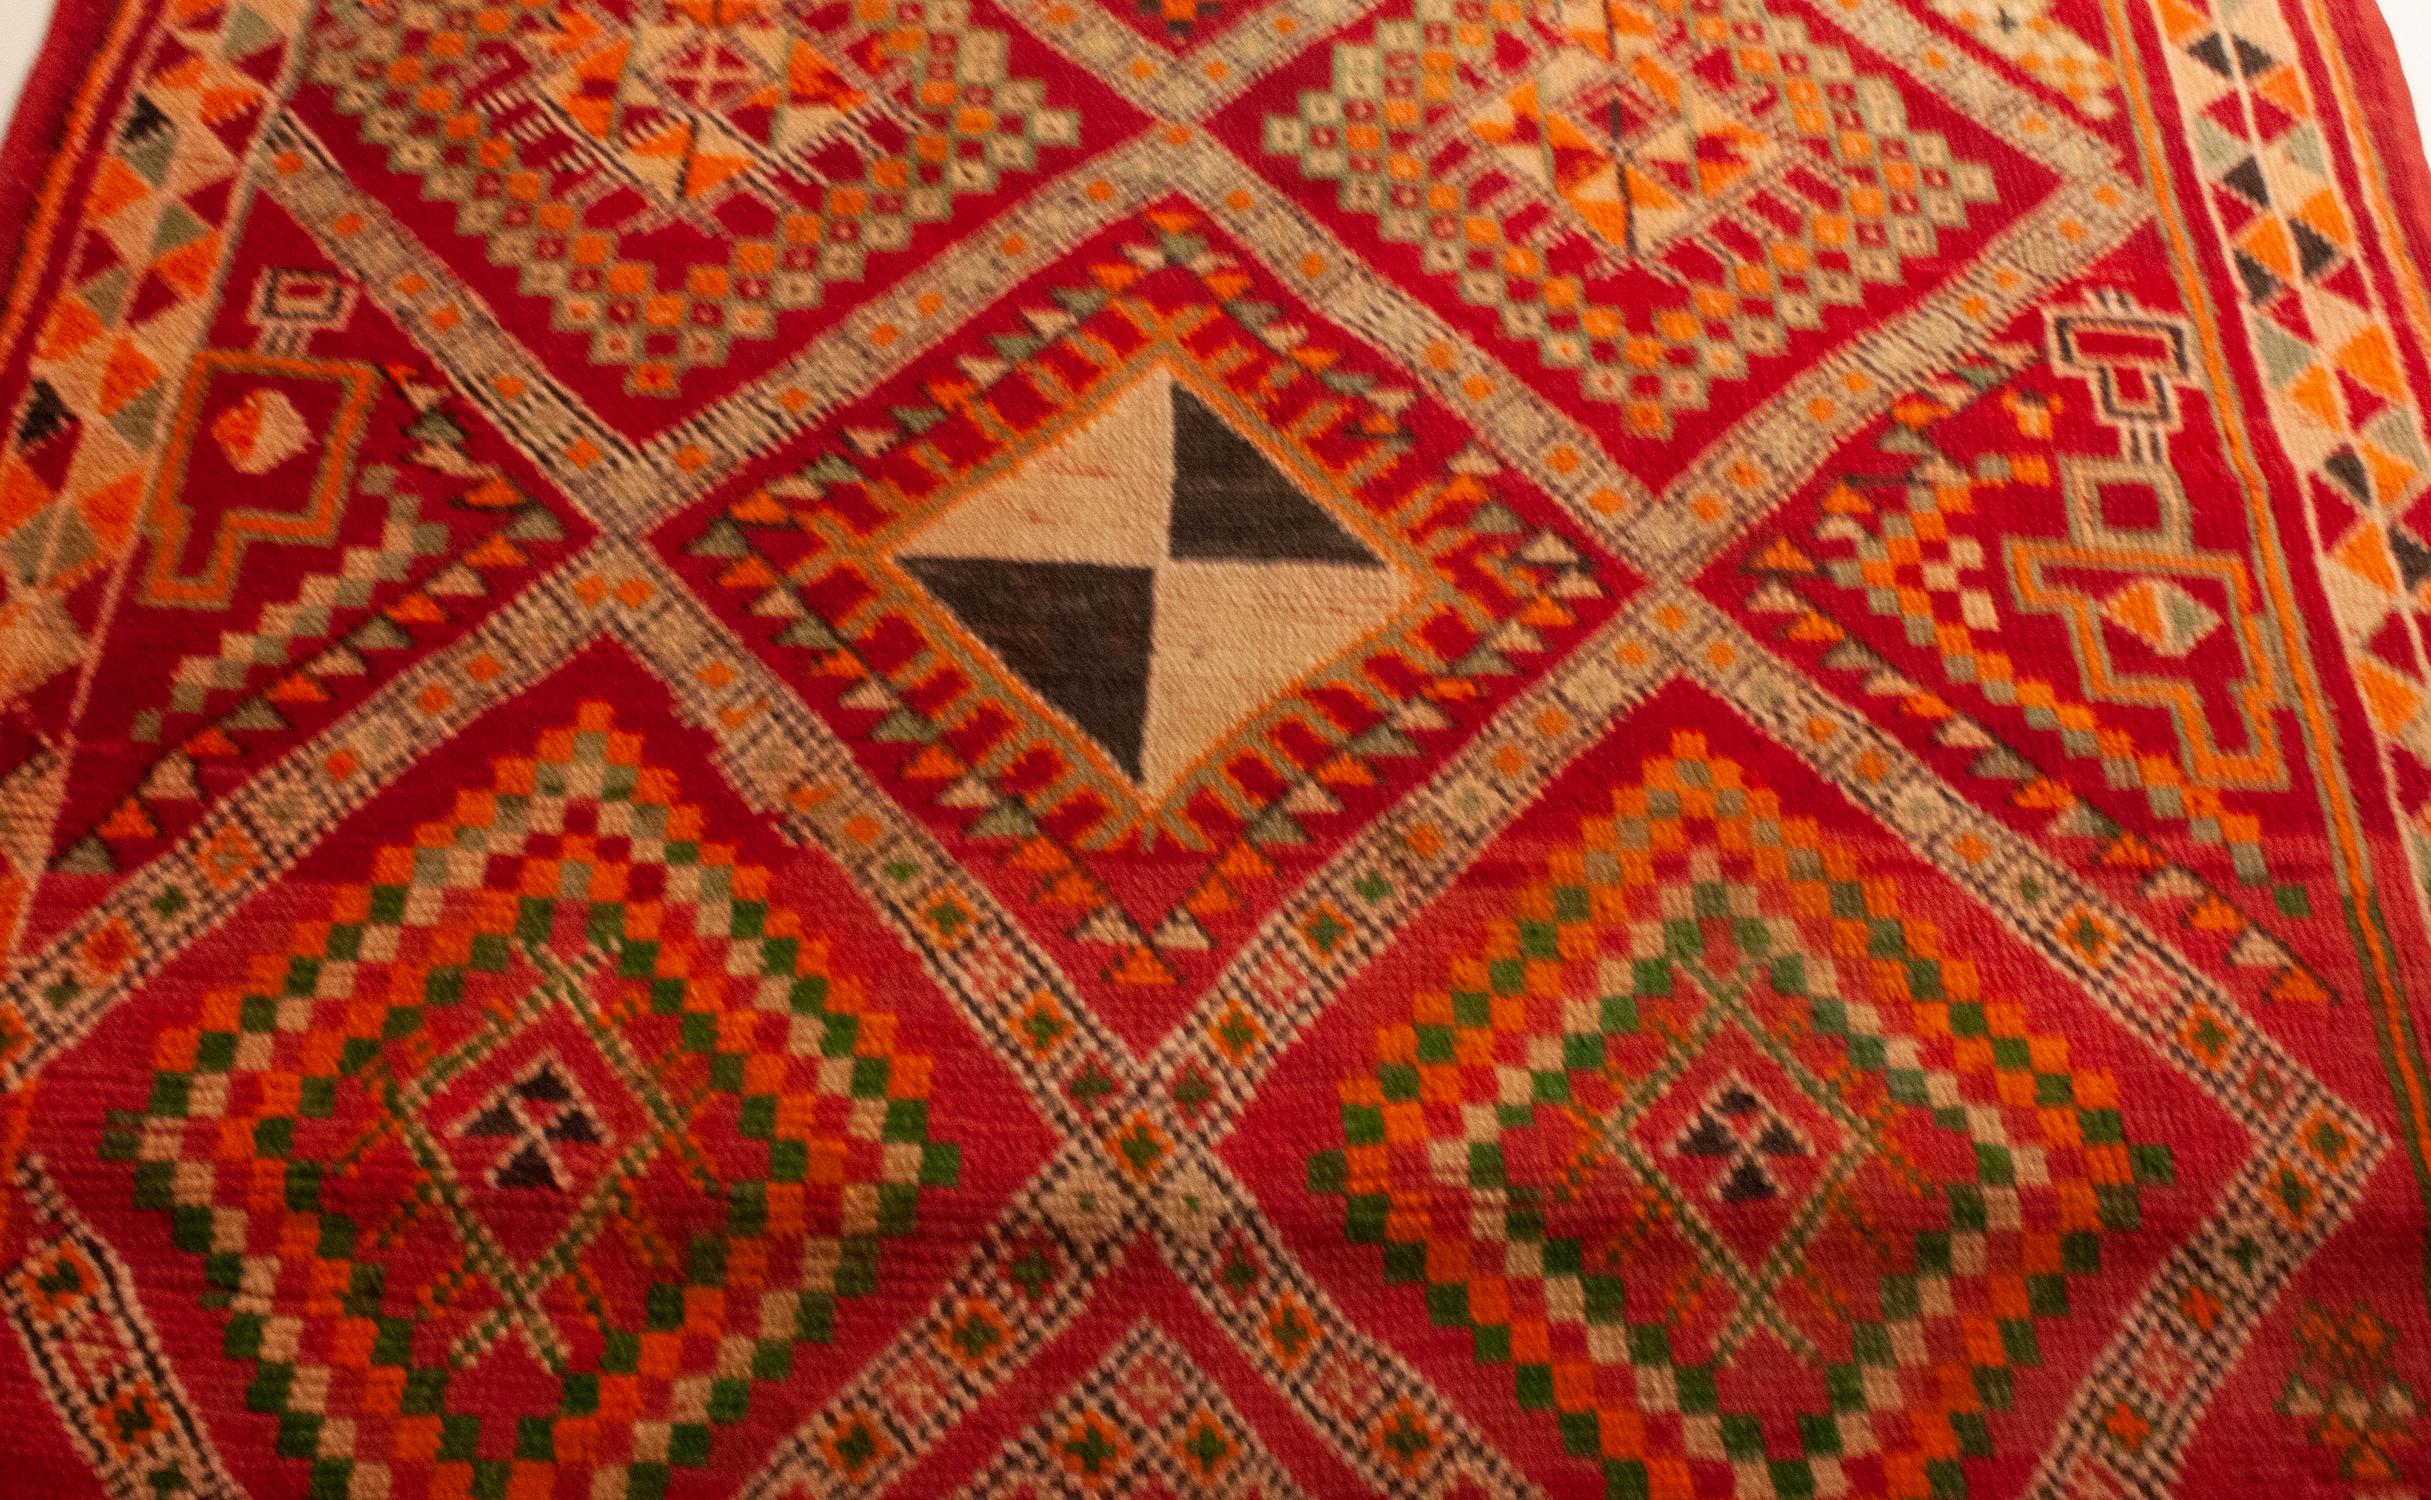 Vintage colorful Moroccan carpet
Nice color and drawing.